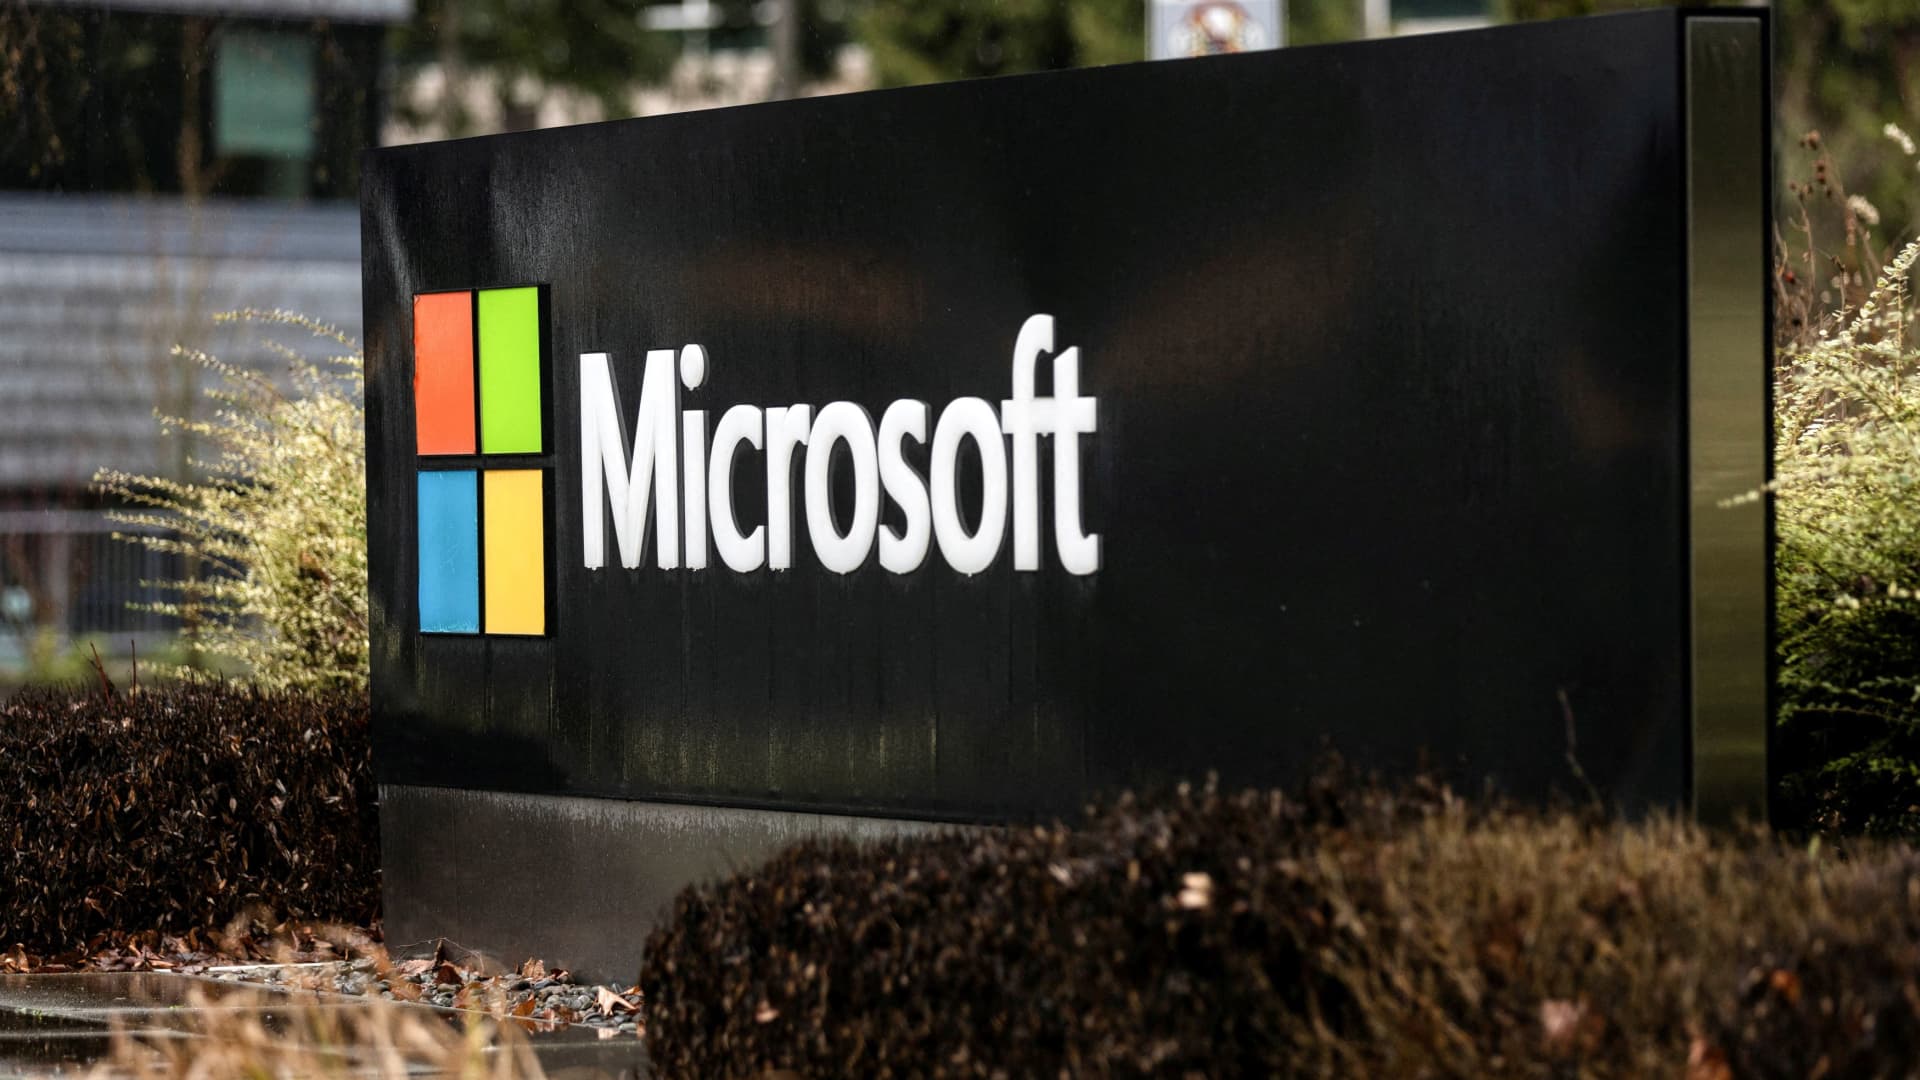 Latest Microsoft results show the tech giant is still a buy, analysts say